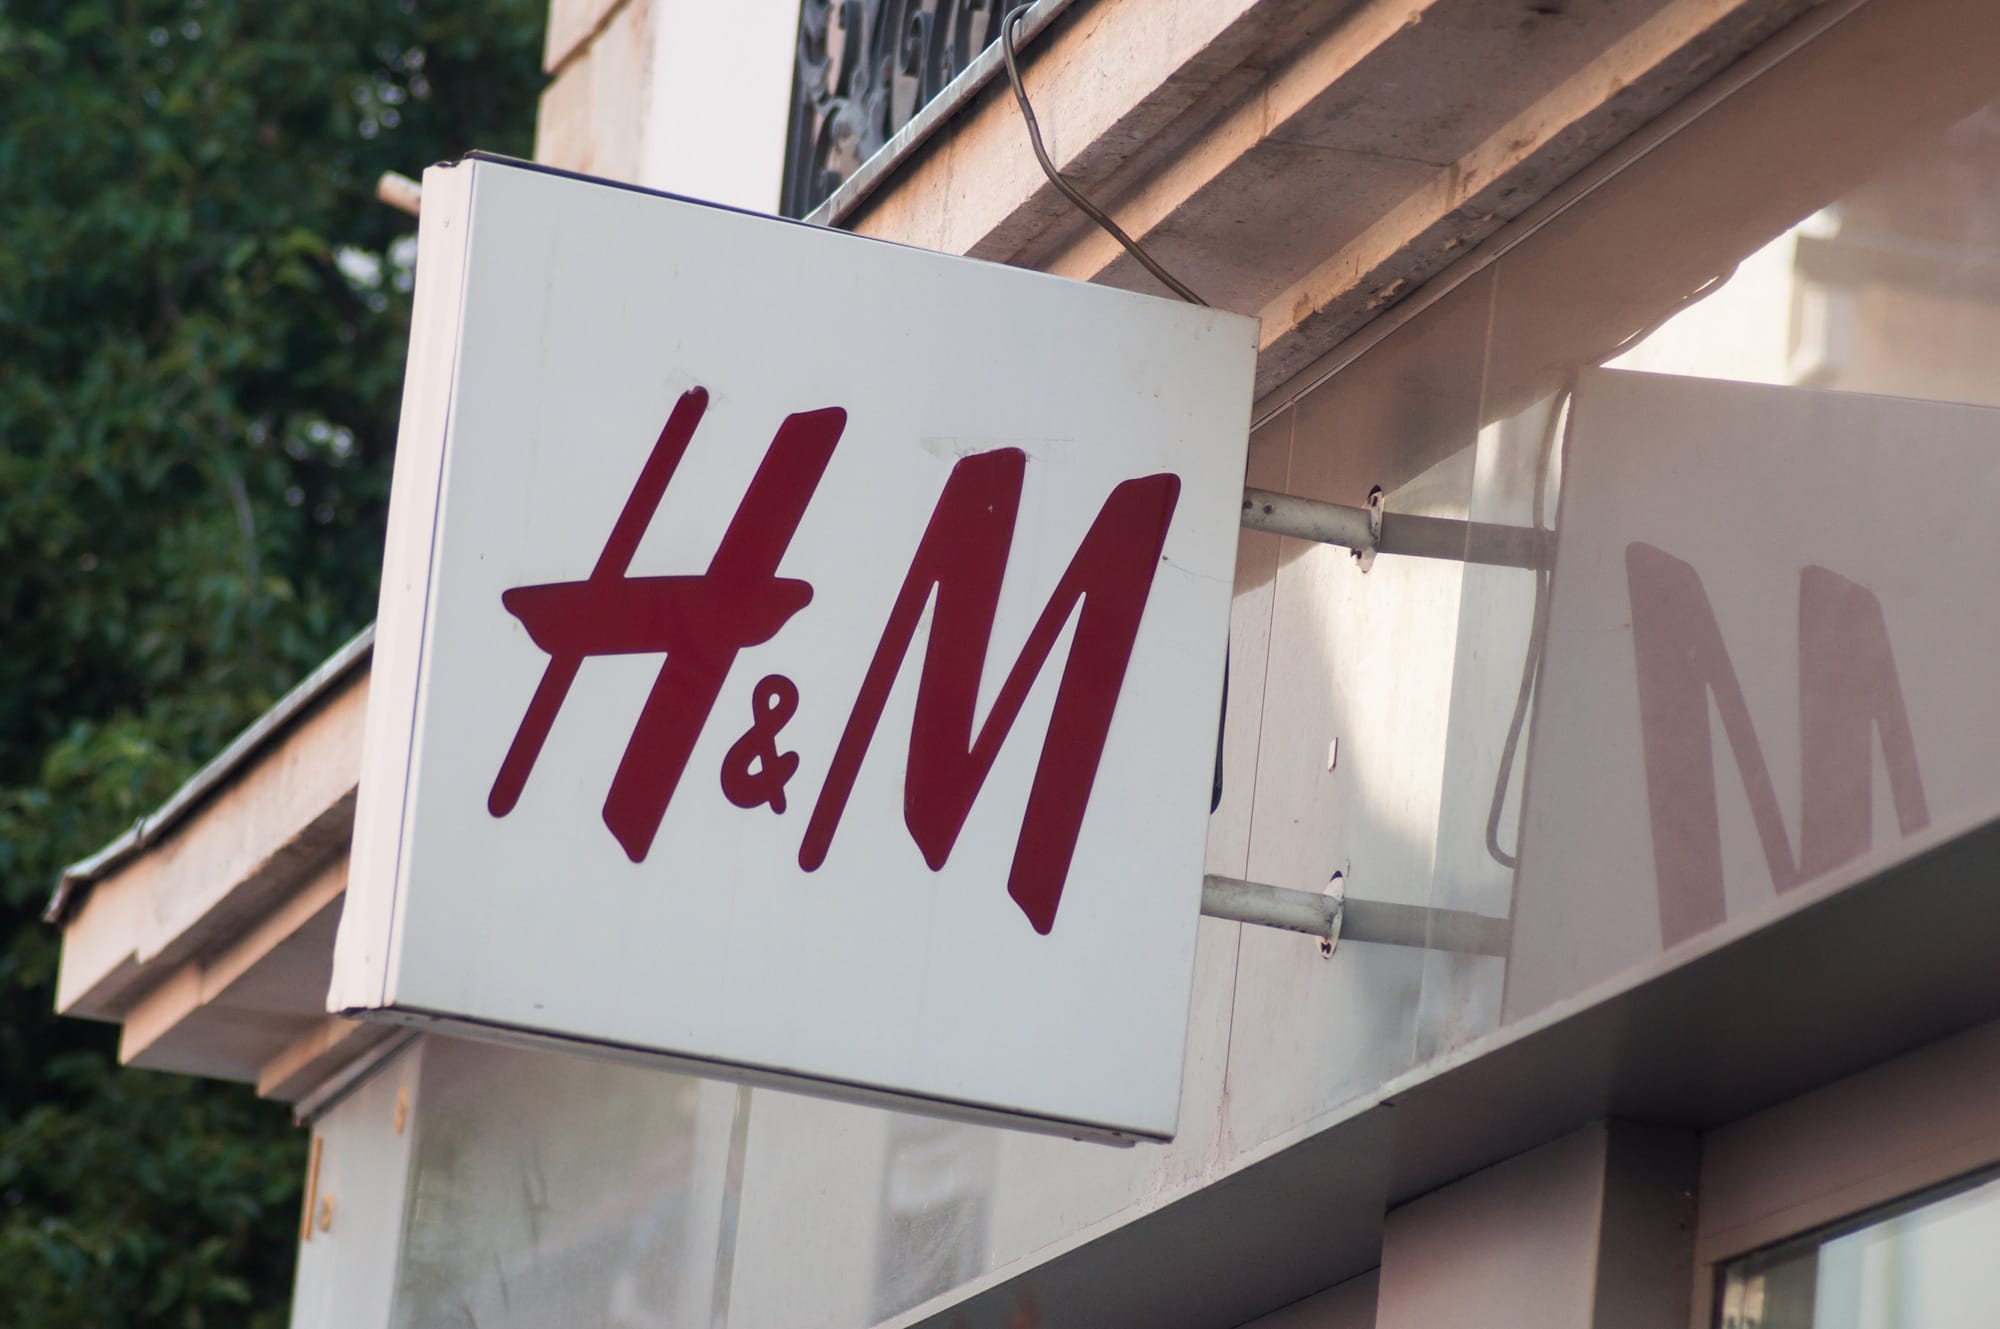 hm-swot-analysis-threats Mulhouse - France - 25 August 2019 - Closeup of H&M logo on stor